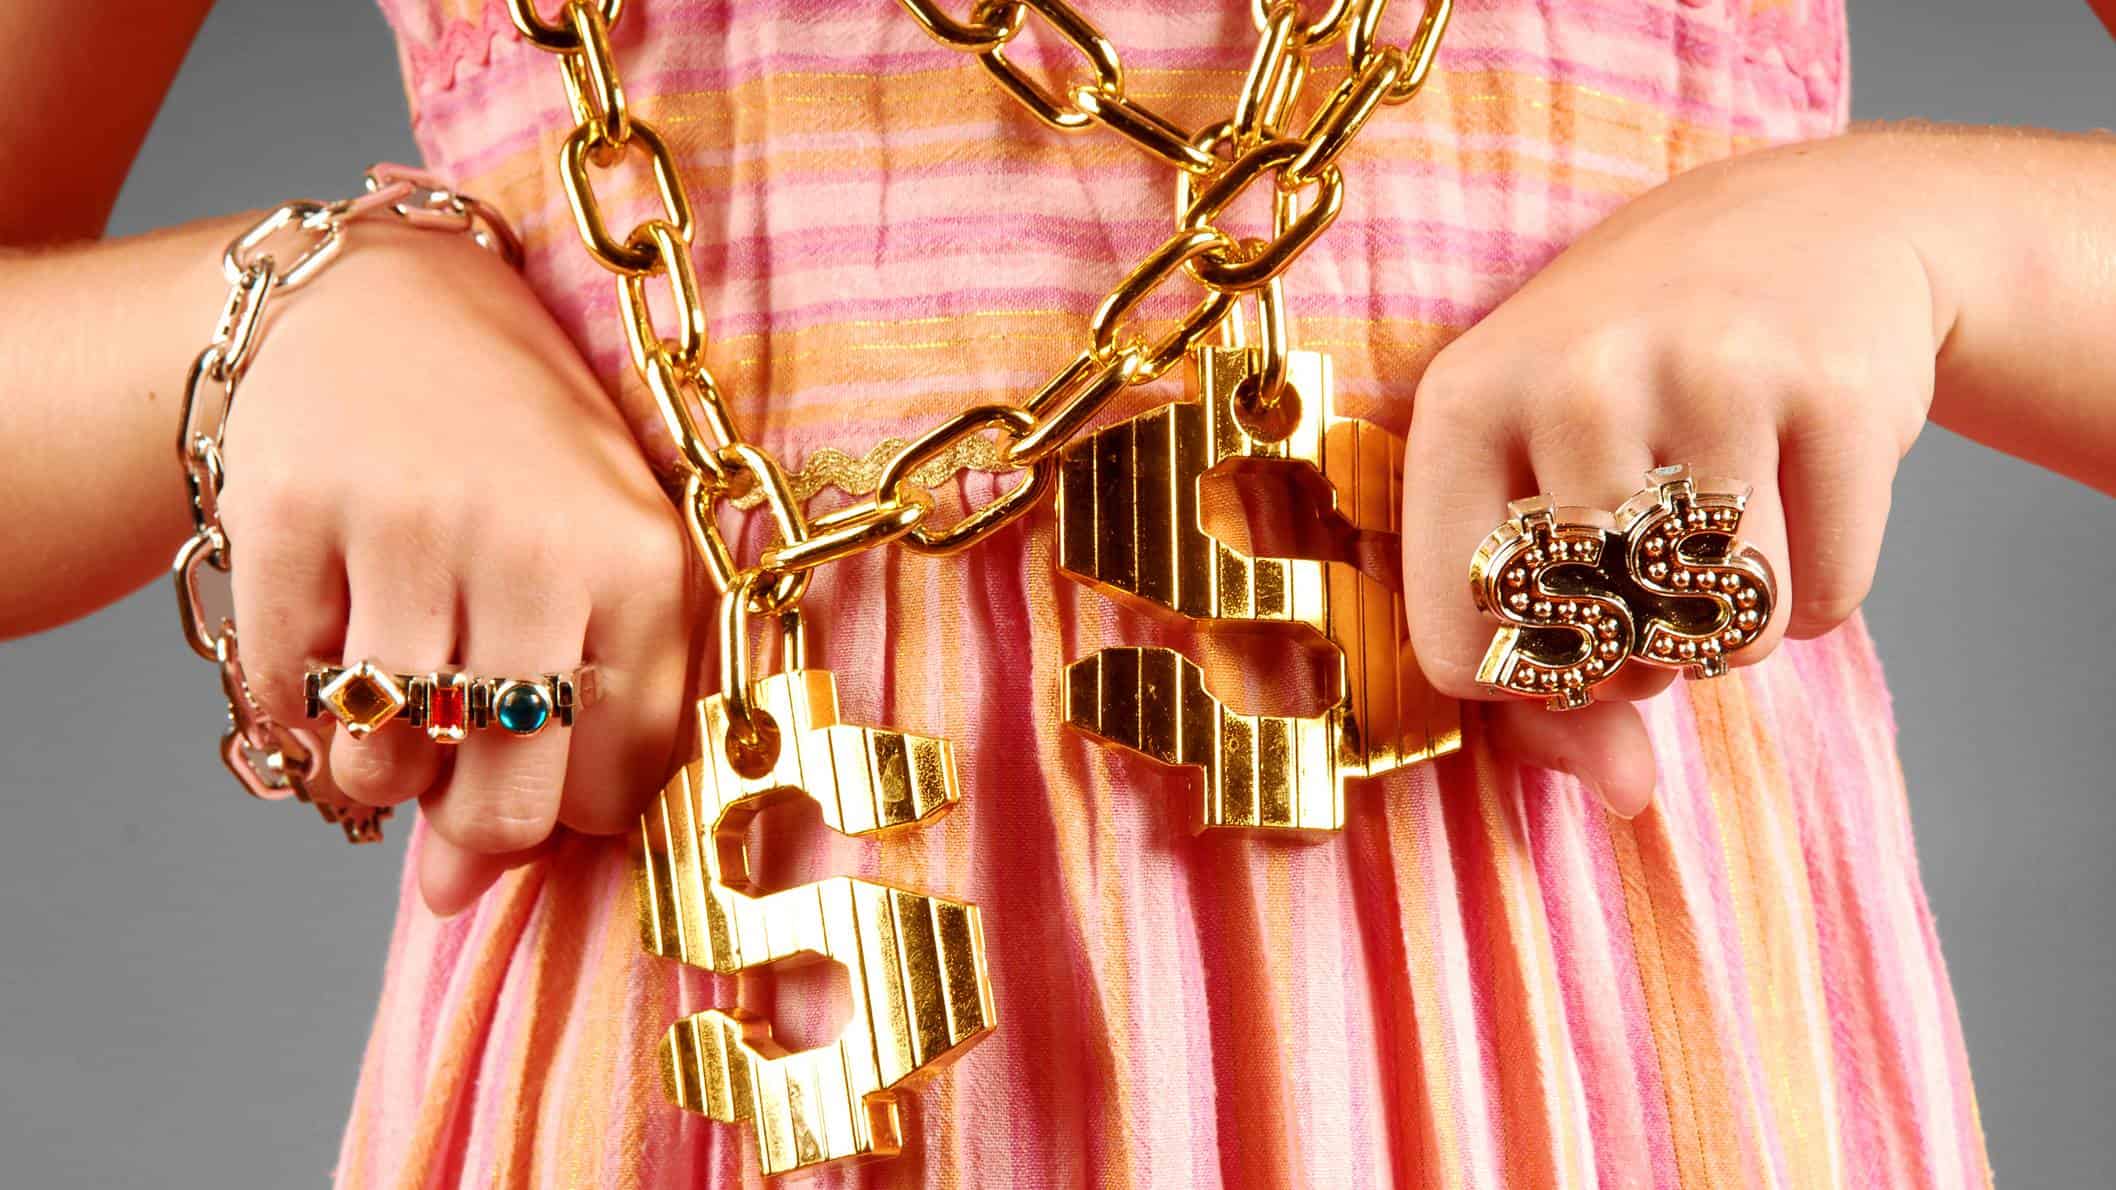 A young woman's hands are shown close up with many blingy gold rings on her fingers and two large gold chains around her neck with dollar signs on them representing the soaring Lovisa share price today